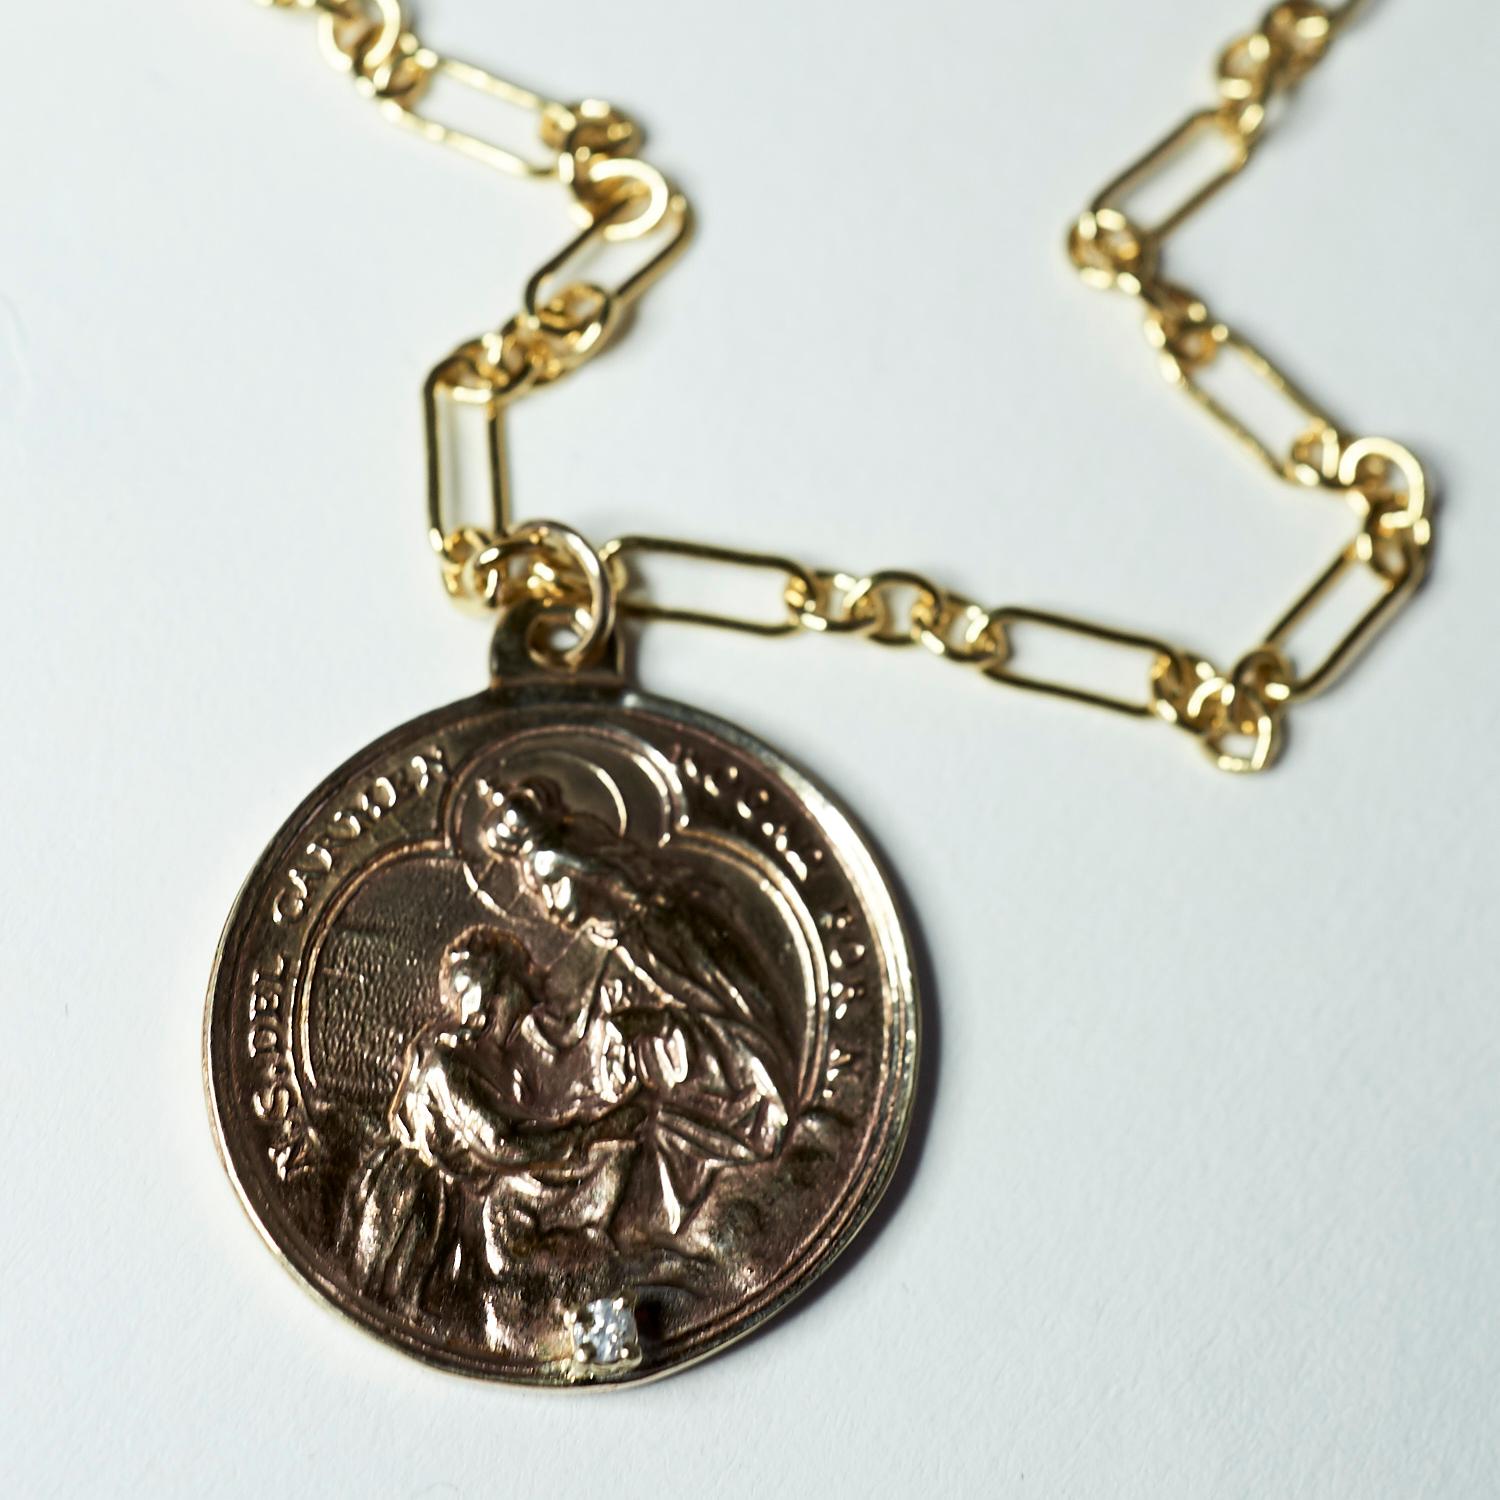 Diamond Virgin Mary Medal Coin Pendant Chain Necklace J Dauphin For Sale 1